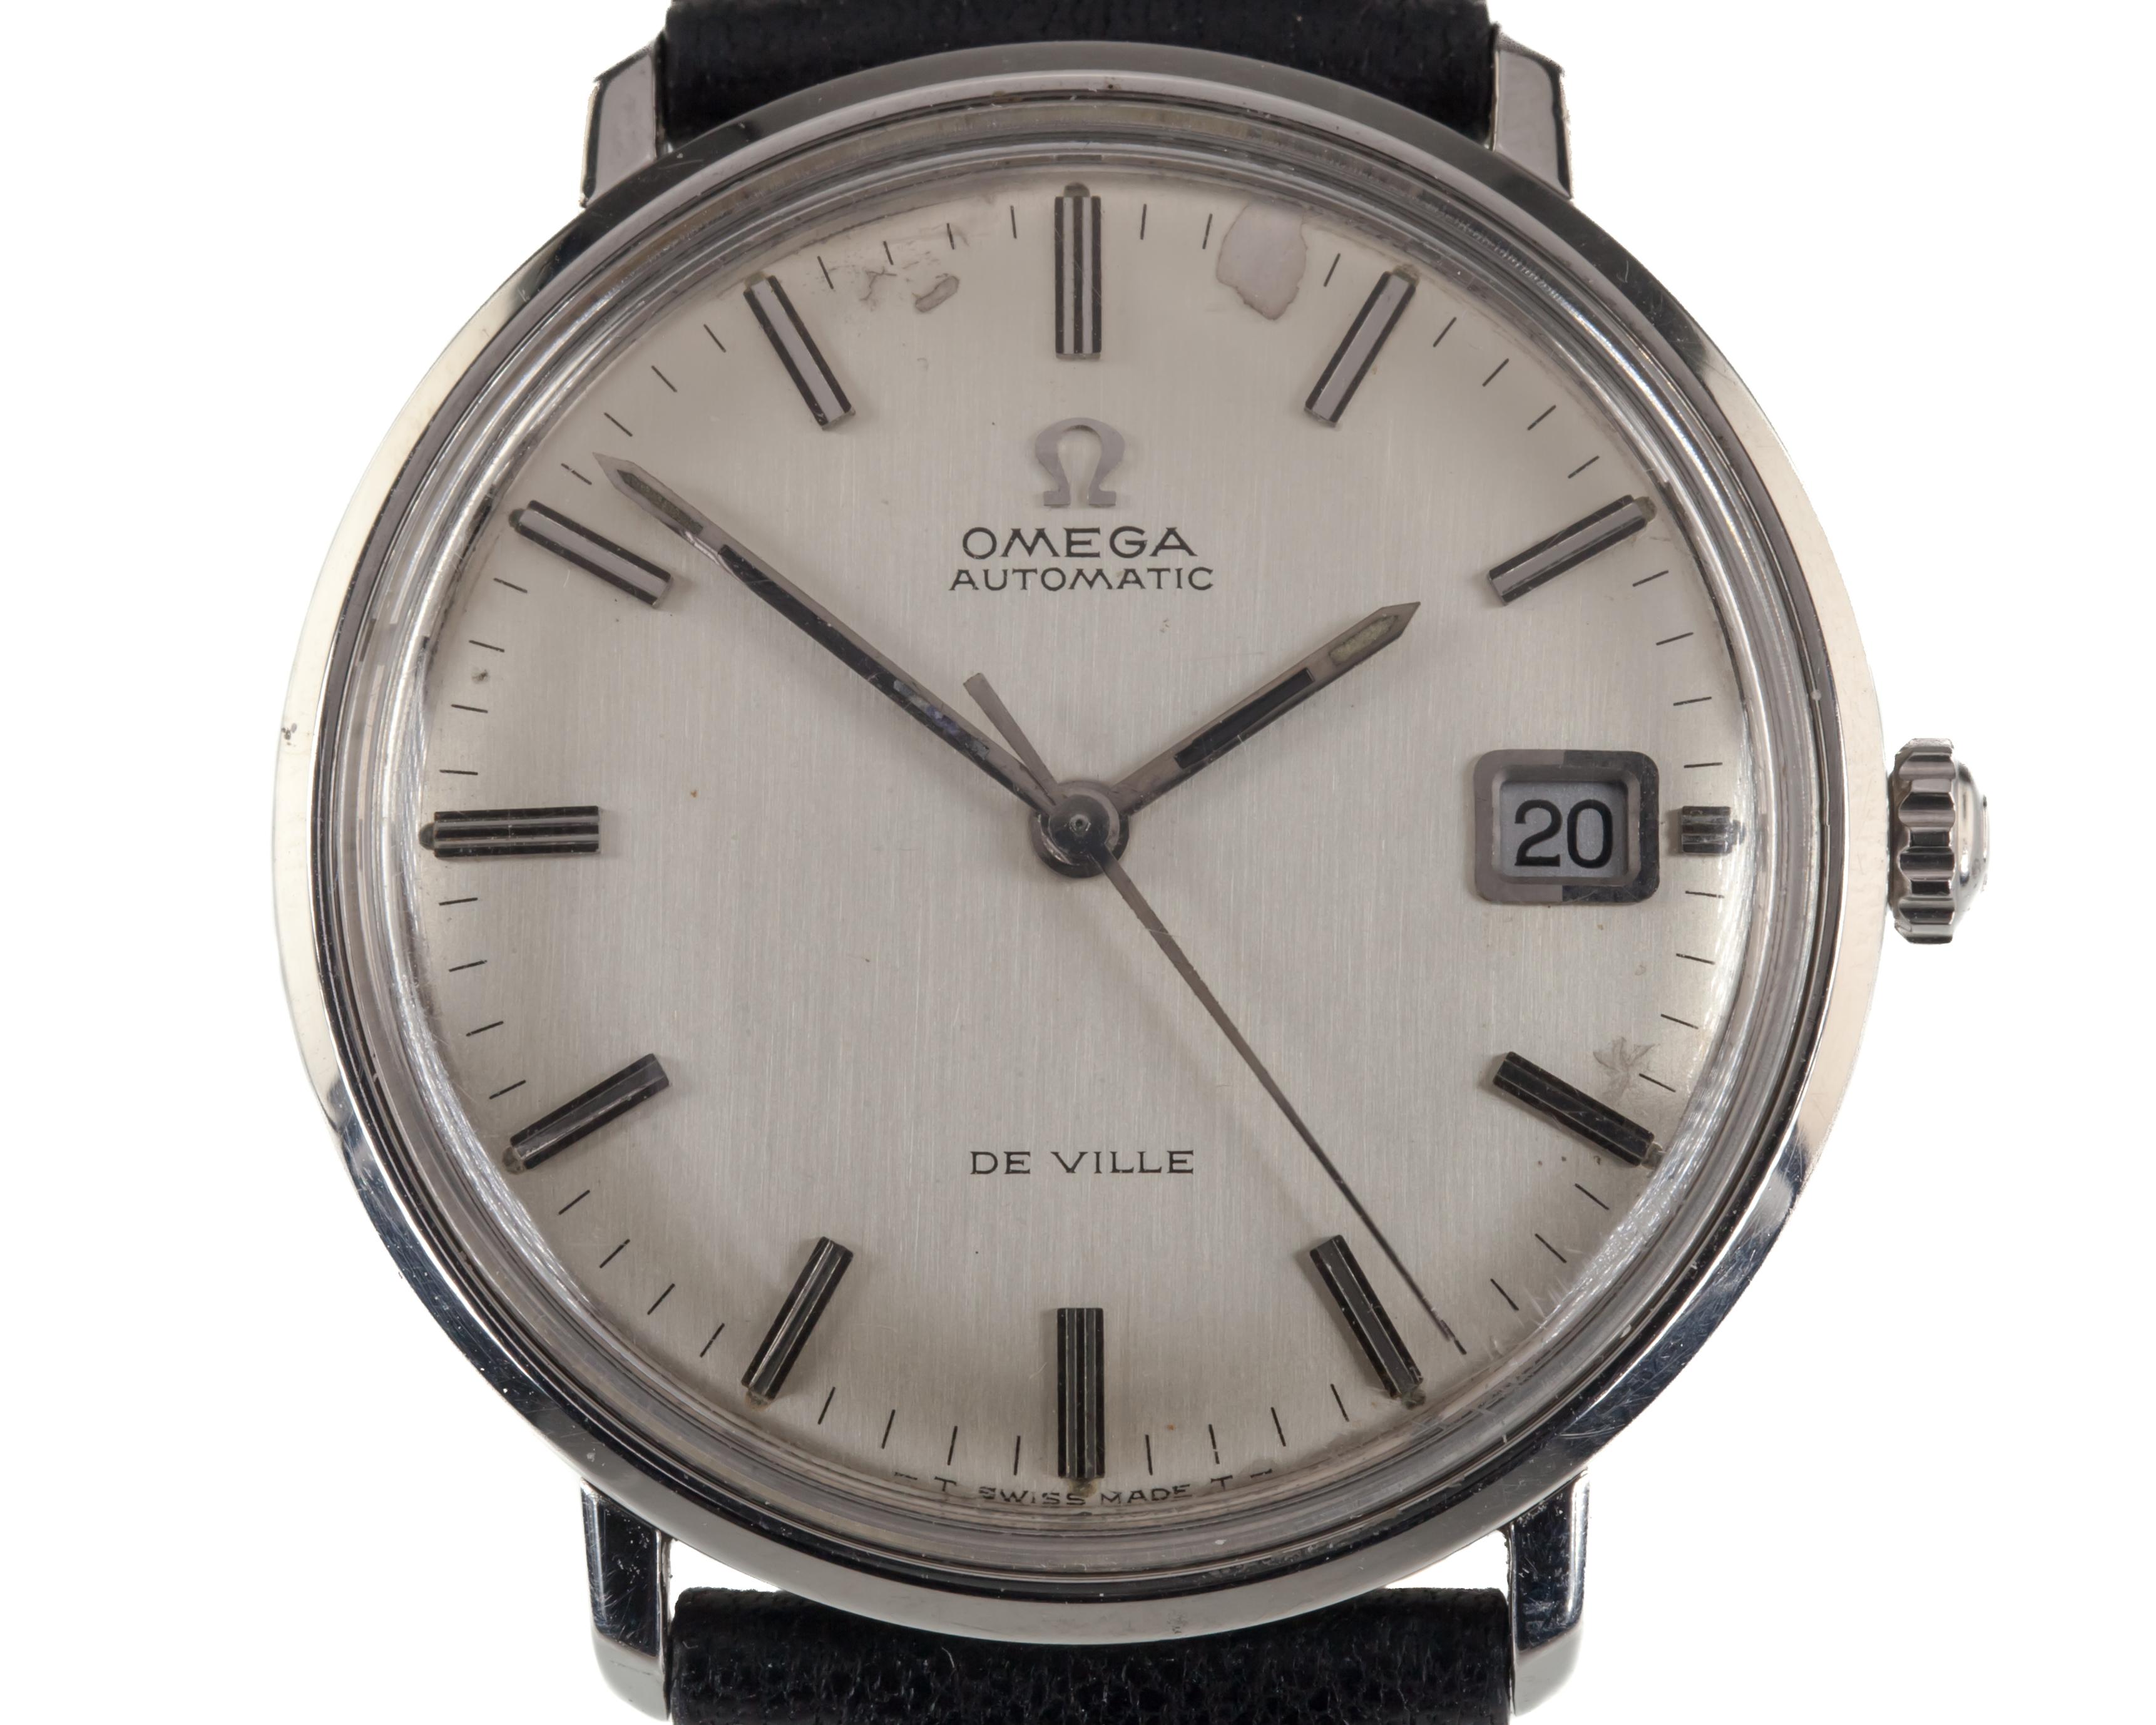 Omega Stainless Steel Men's Automatic DeVille Watch w/ Date and Leather Band

Movement #565
Movement Serial #307684XX
Year: 1969
Case #166.033

Stainless Steel Round Case
34 mm in Diameter (36 mm w/ Crown)
Lug-to-Lug Distance = 32 mm
Lug-to-Lug